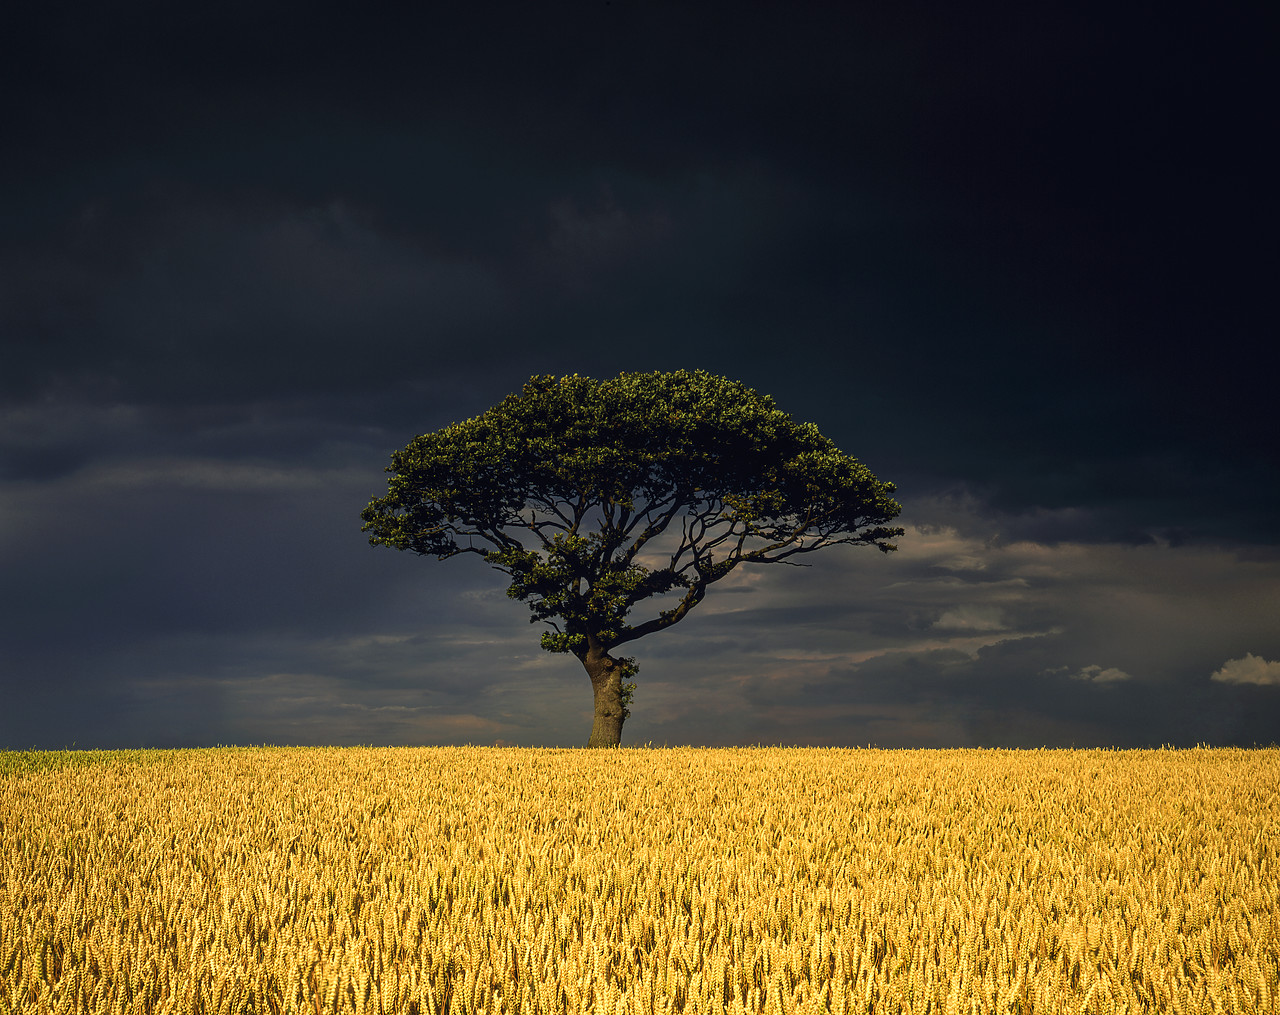 #934339-2 - Storm over Oak Tree in Wheat Field, Clippesby, Norfolk, England